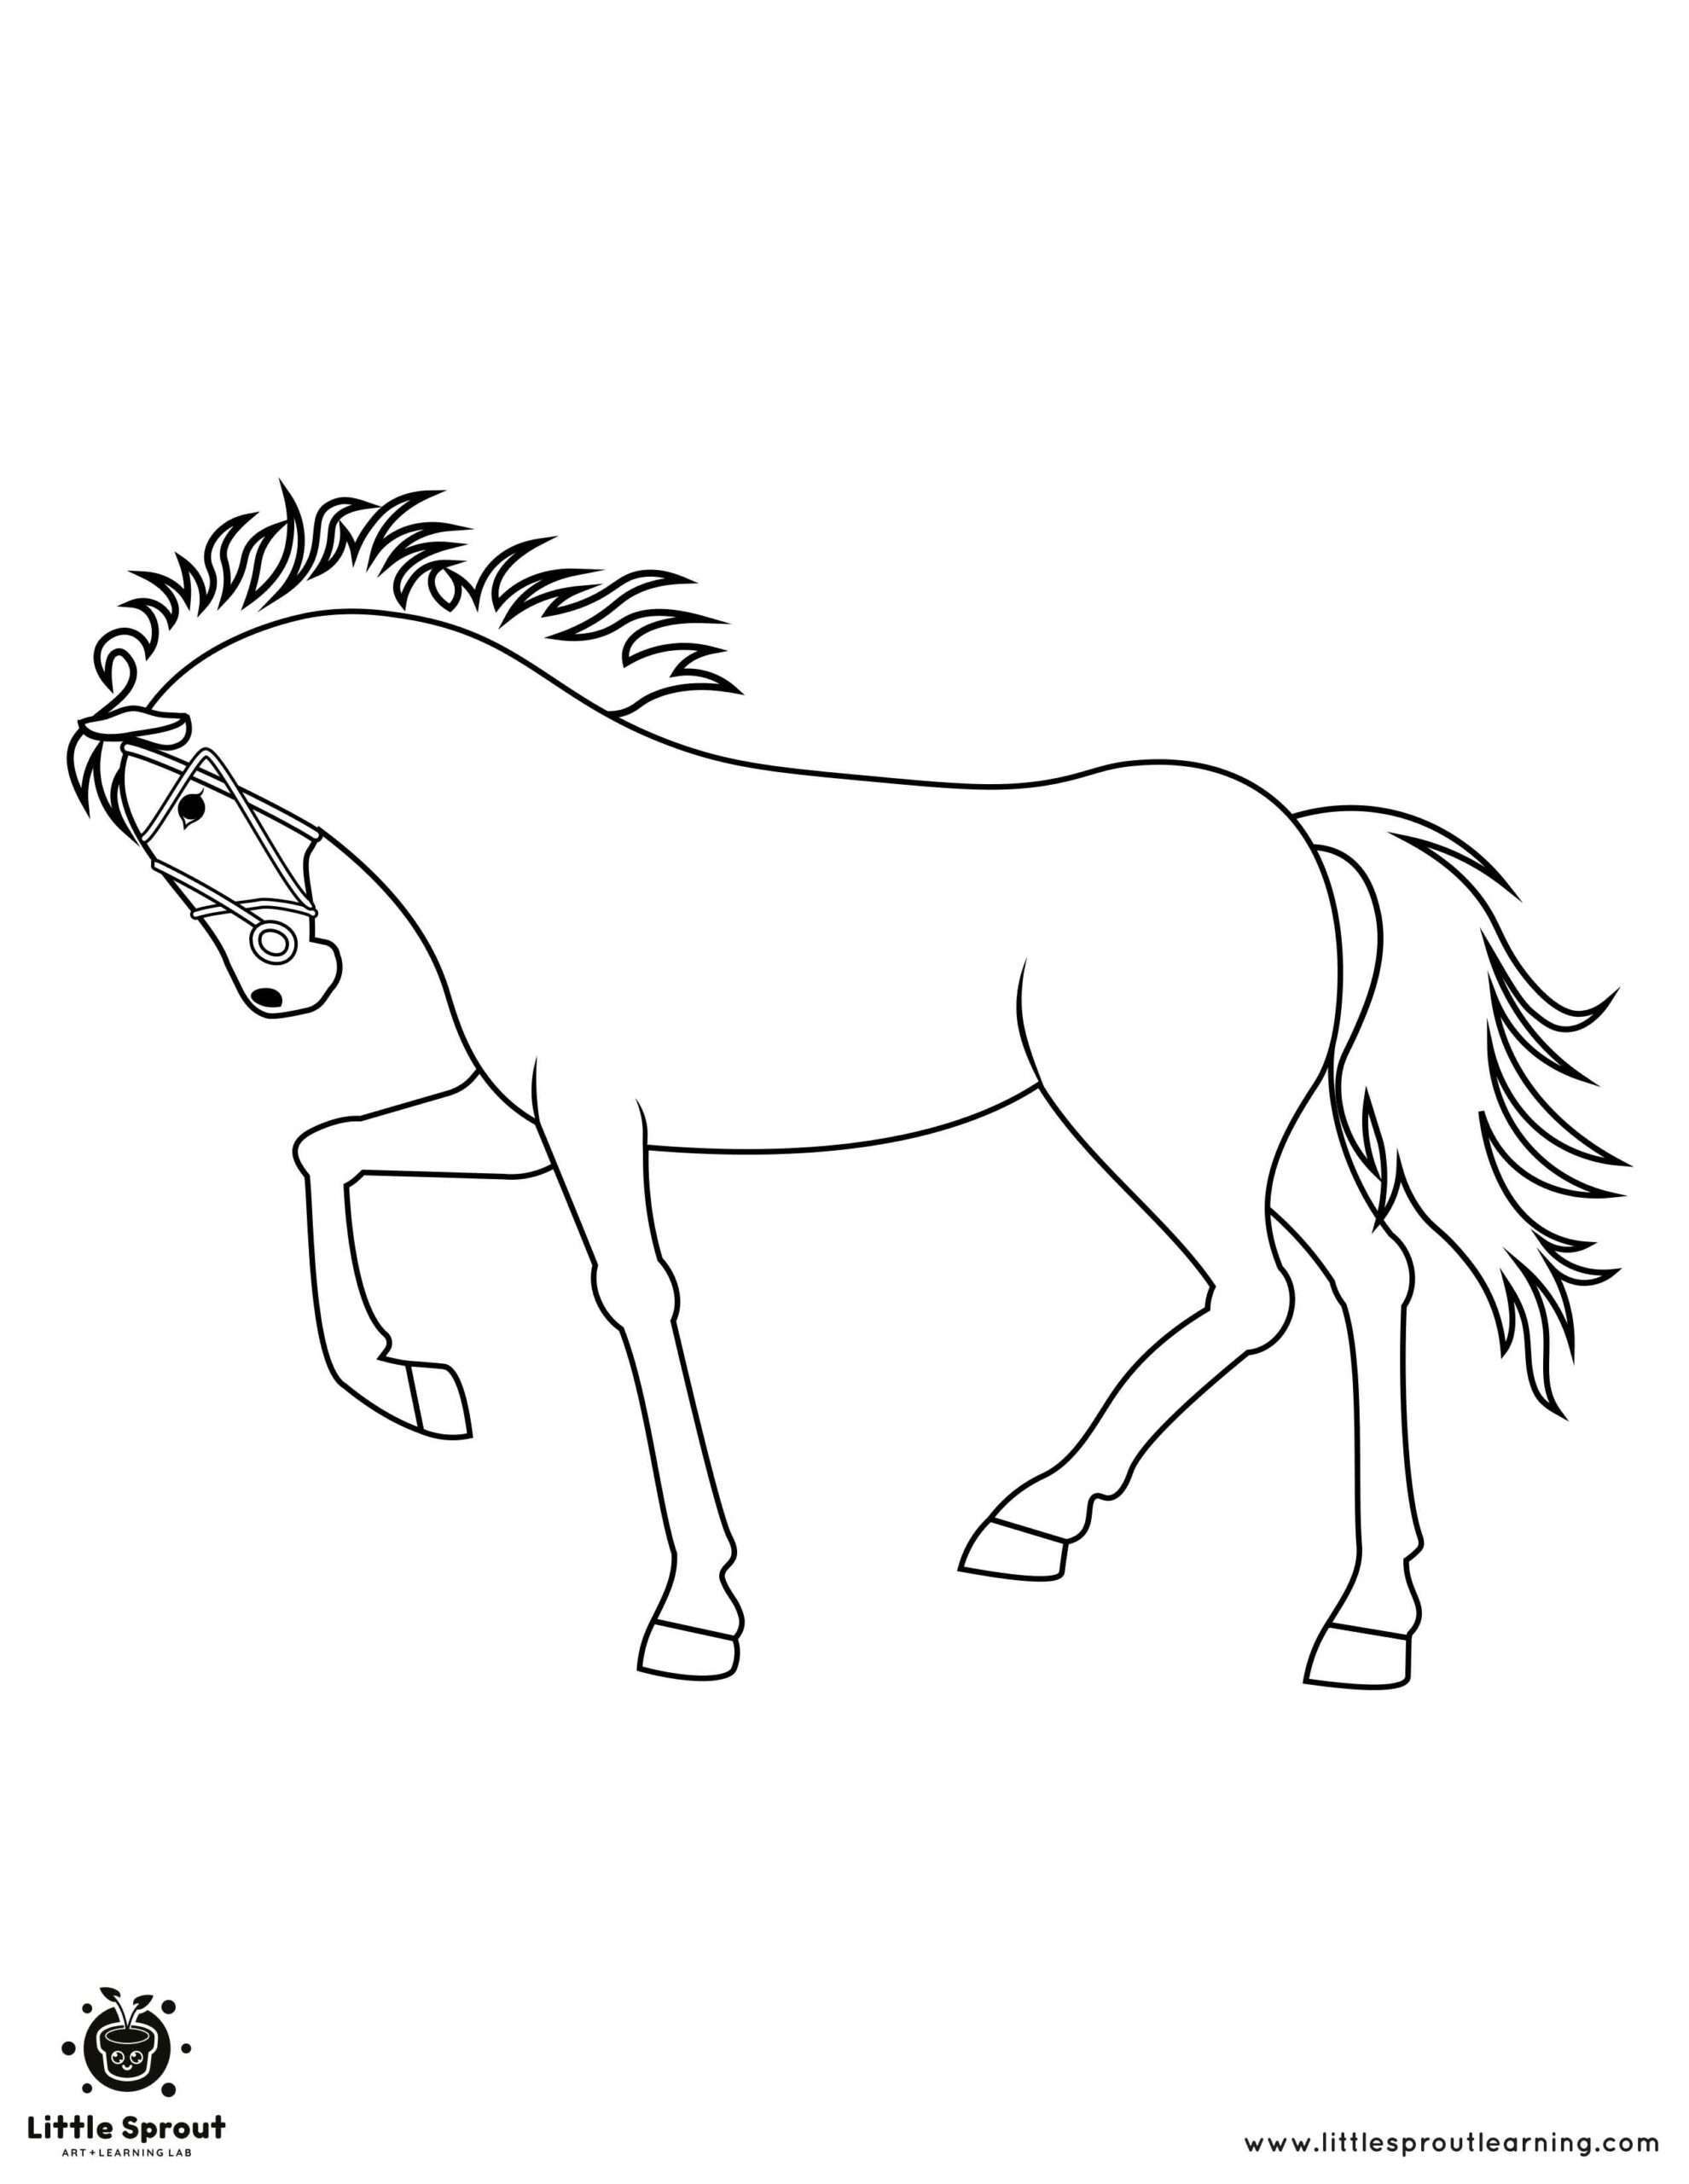 Relaxed Horse Coloring Page